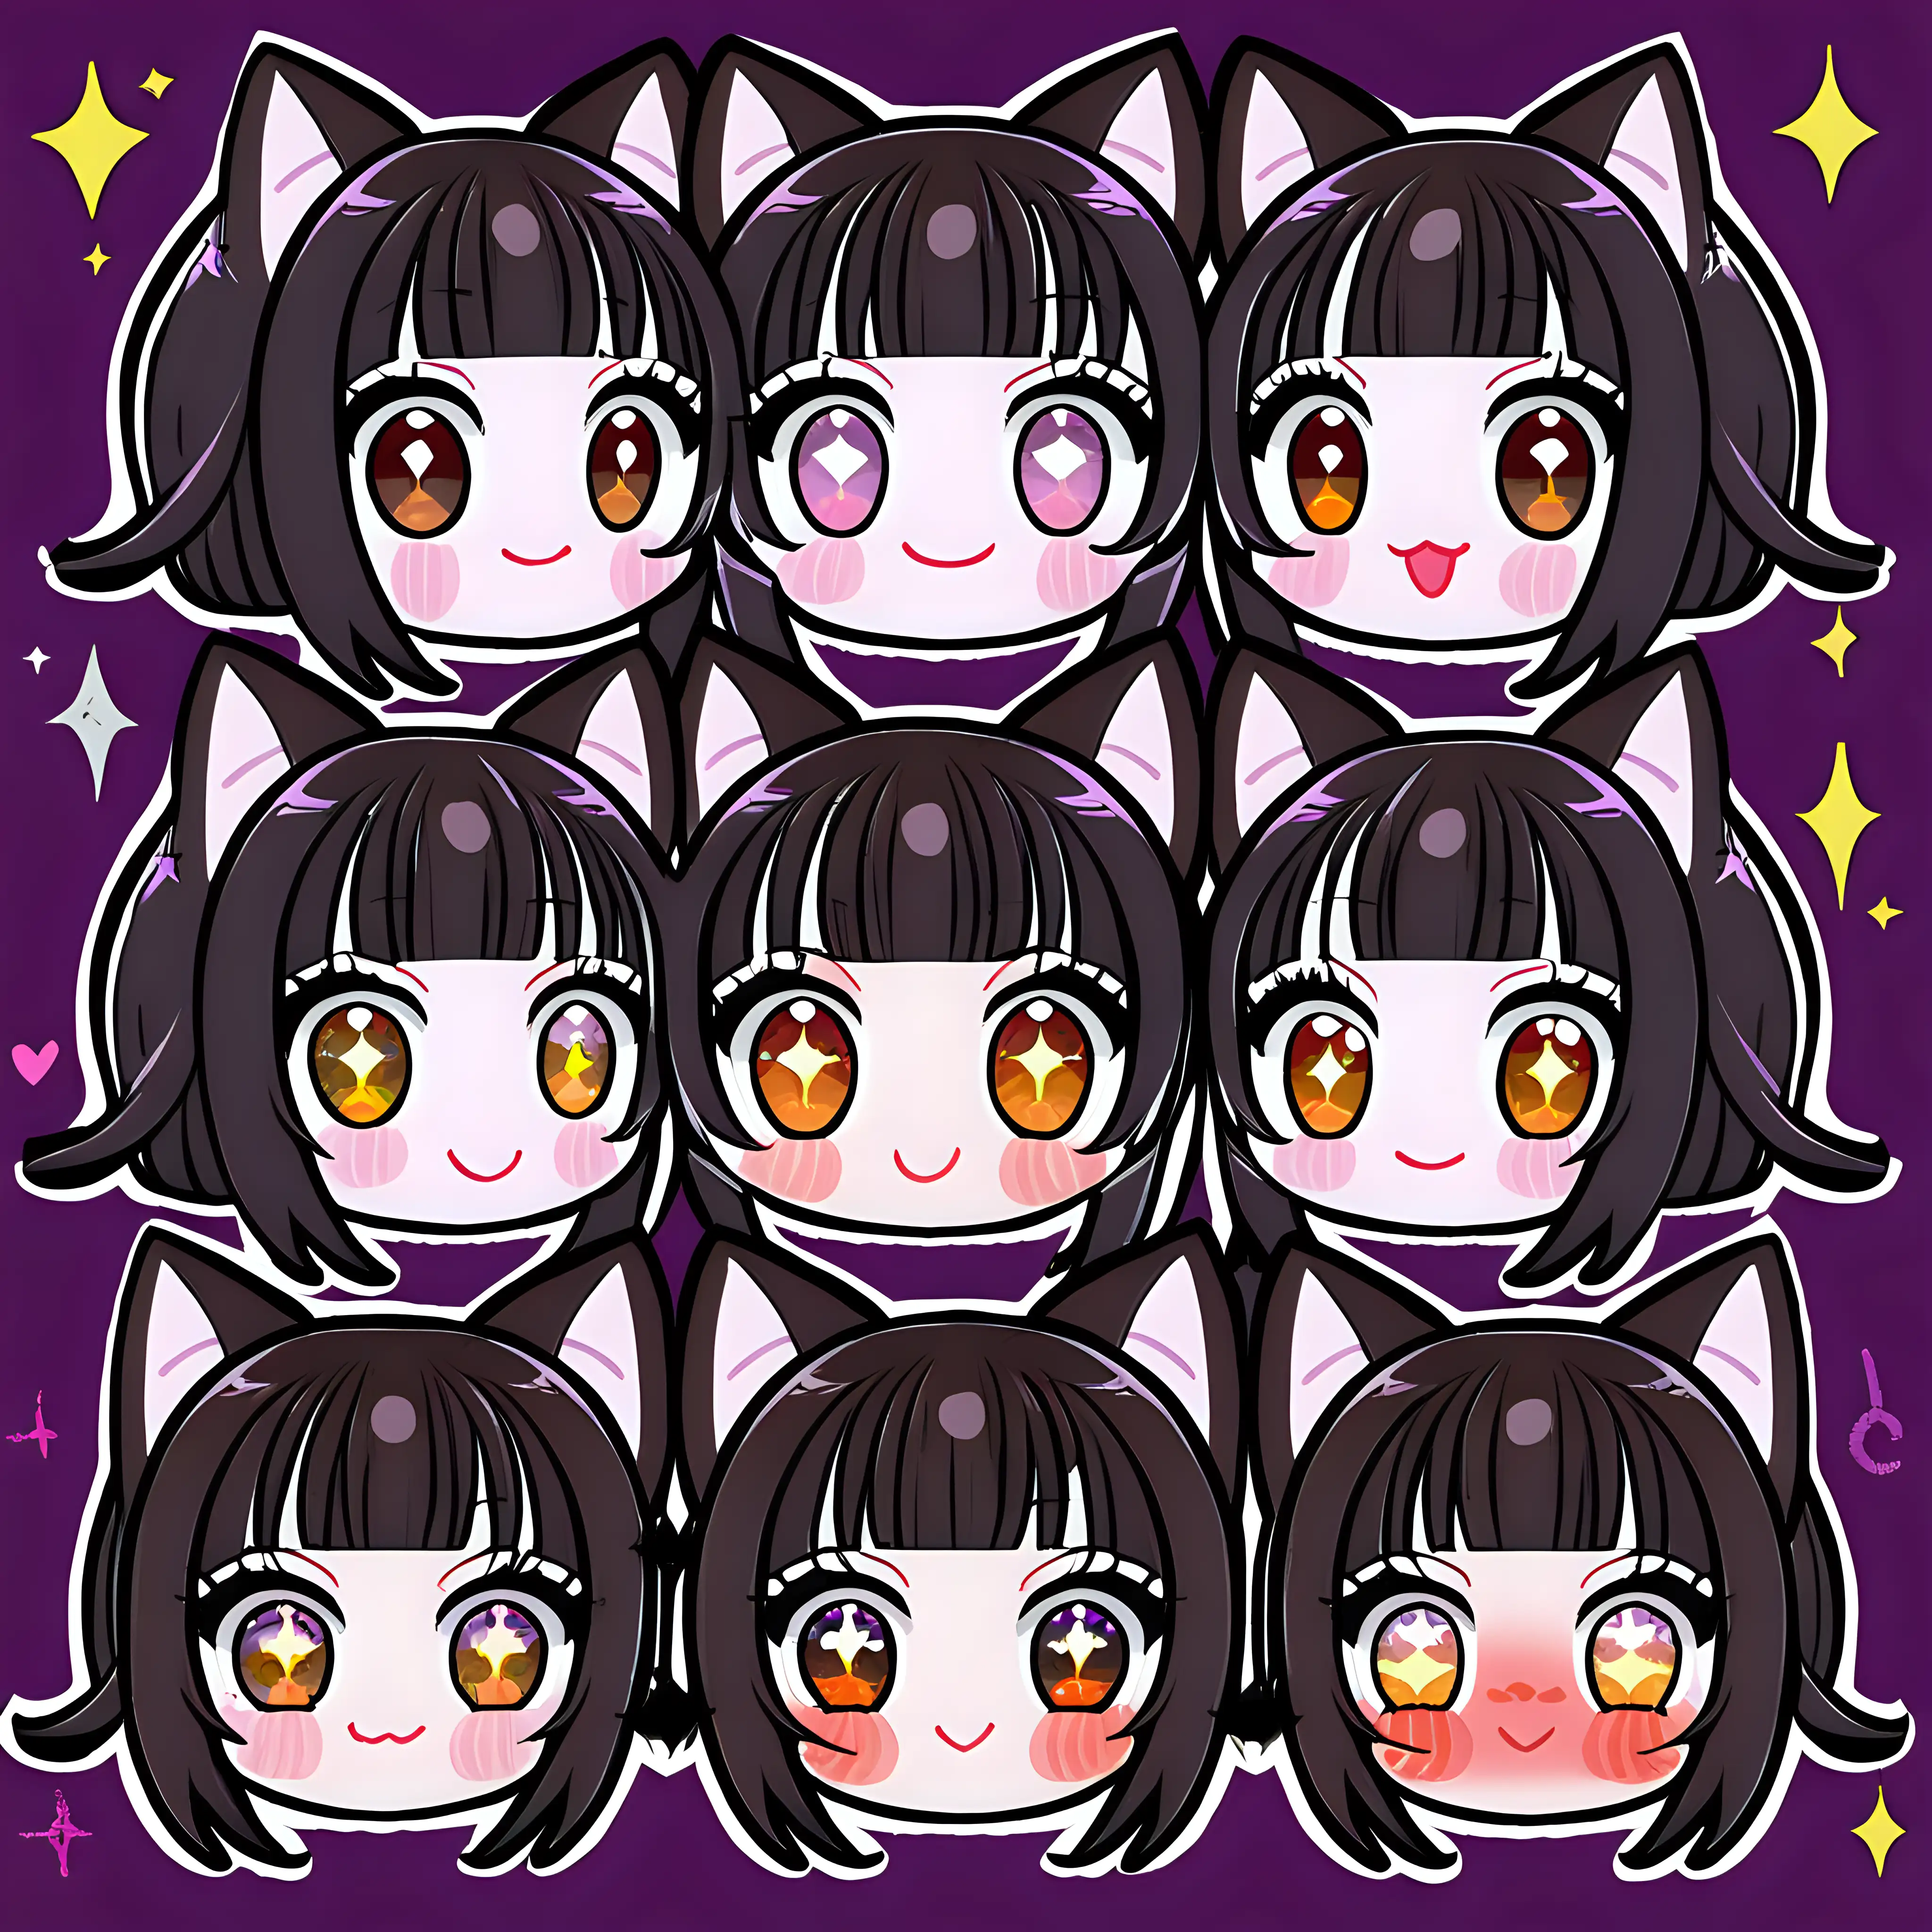 ChibiStyle Cute Girls with Black Hair and Cat Ears Twitch Emote Set